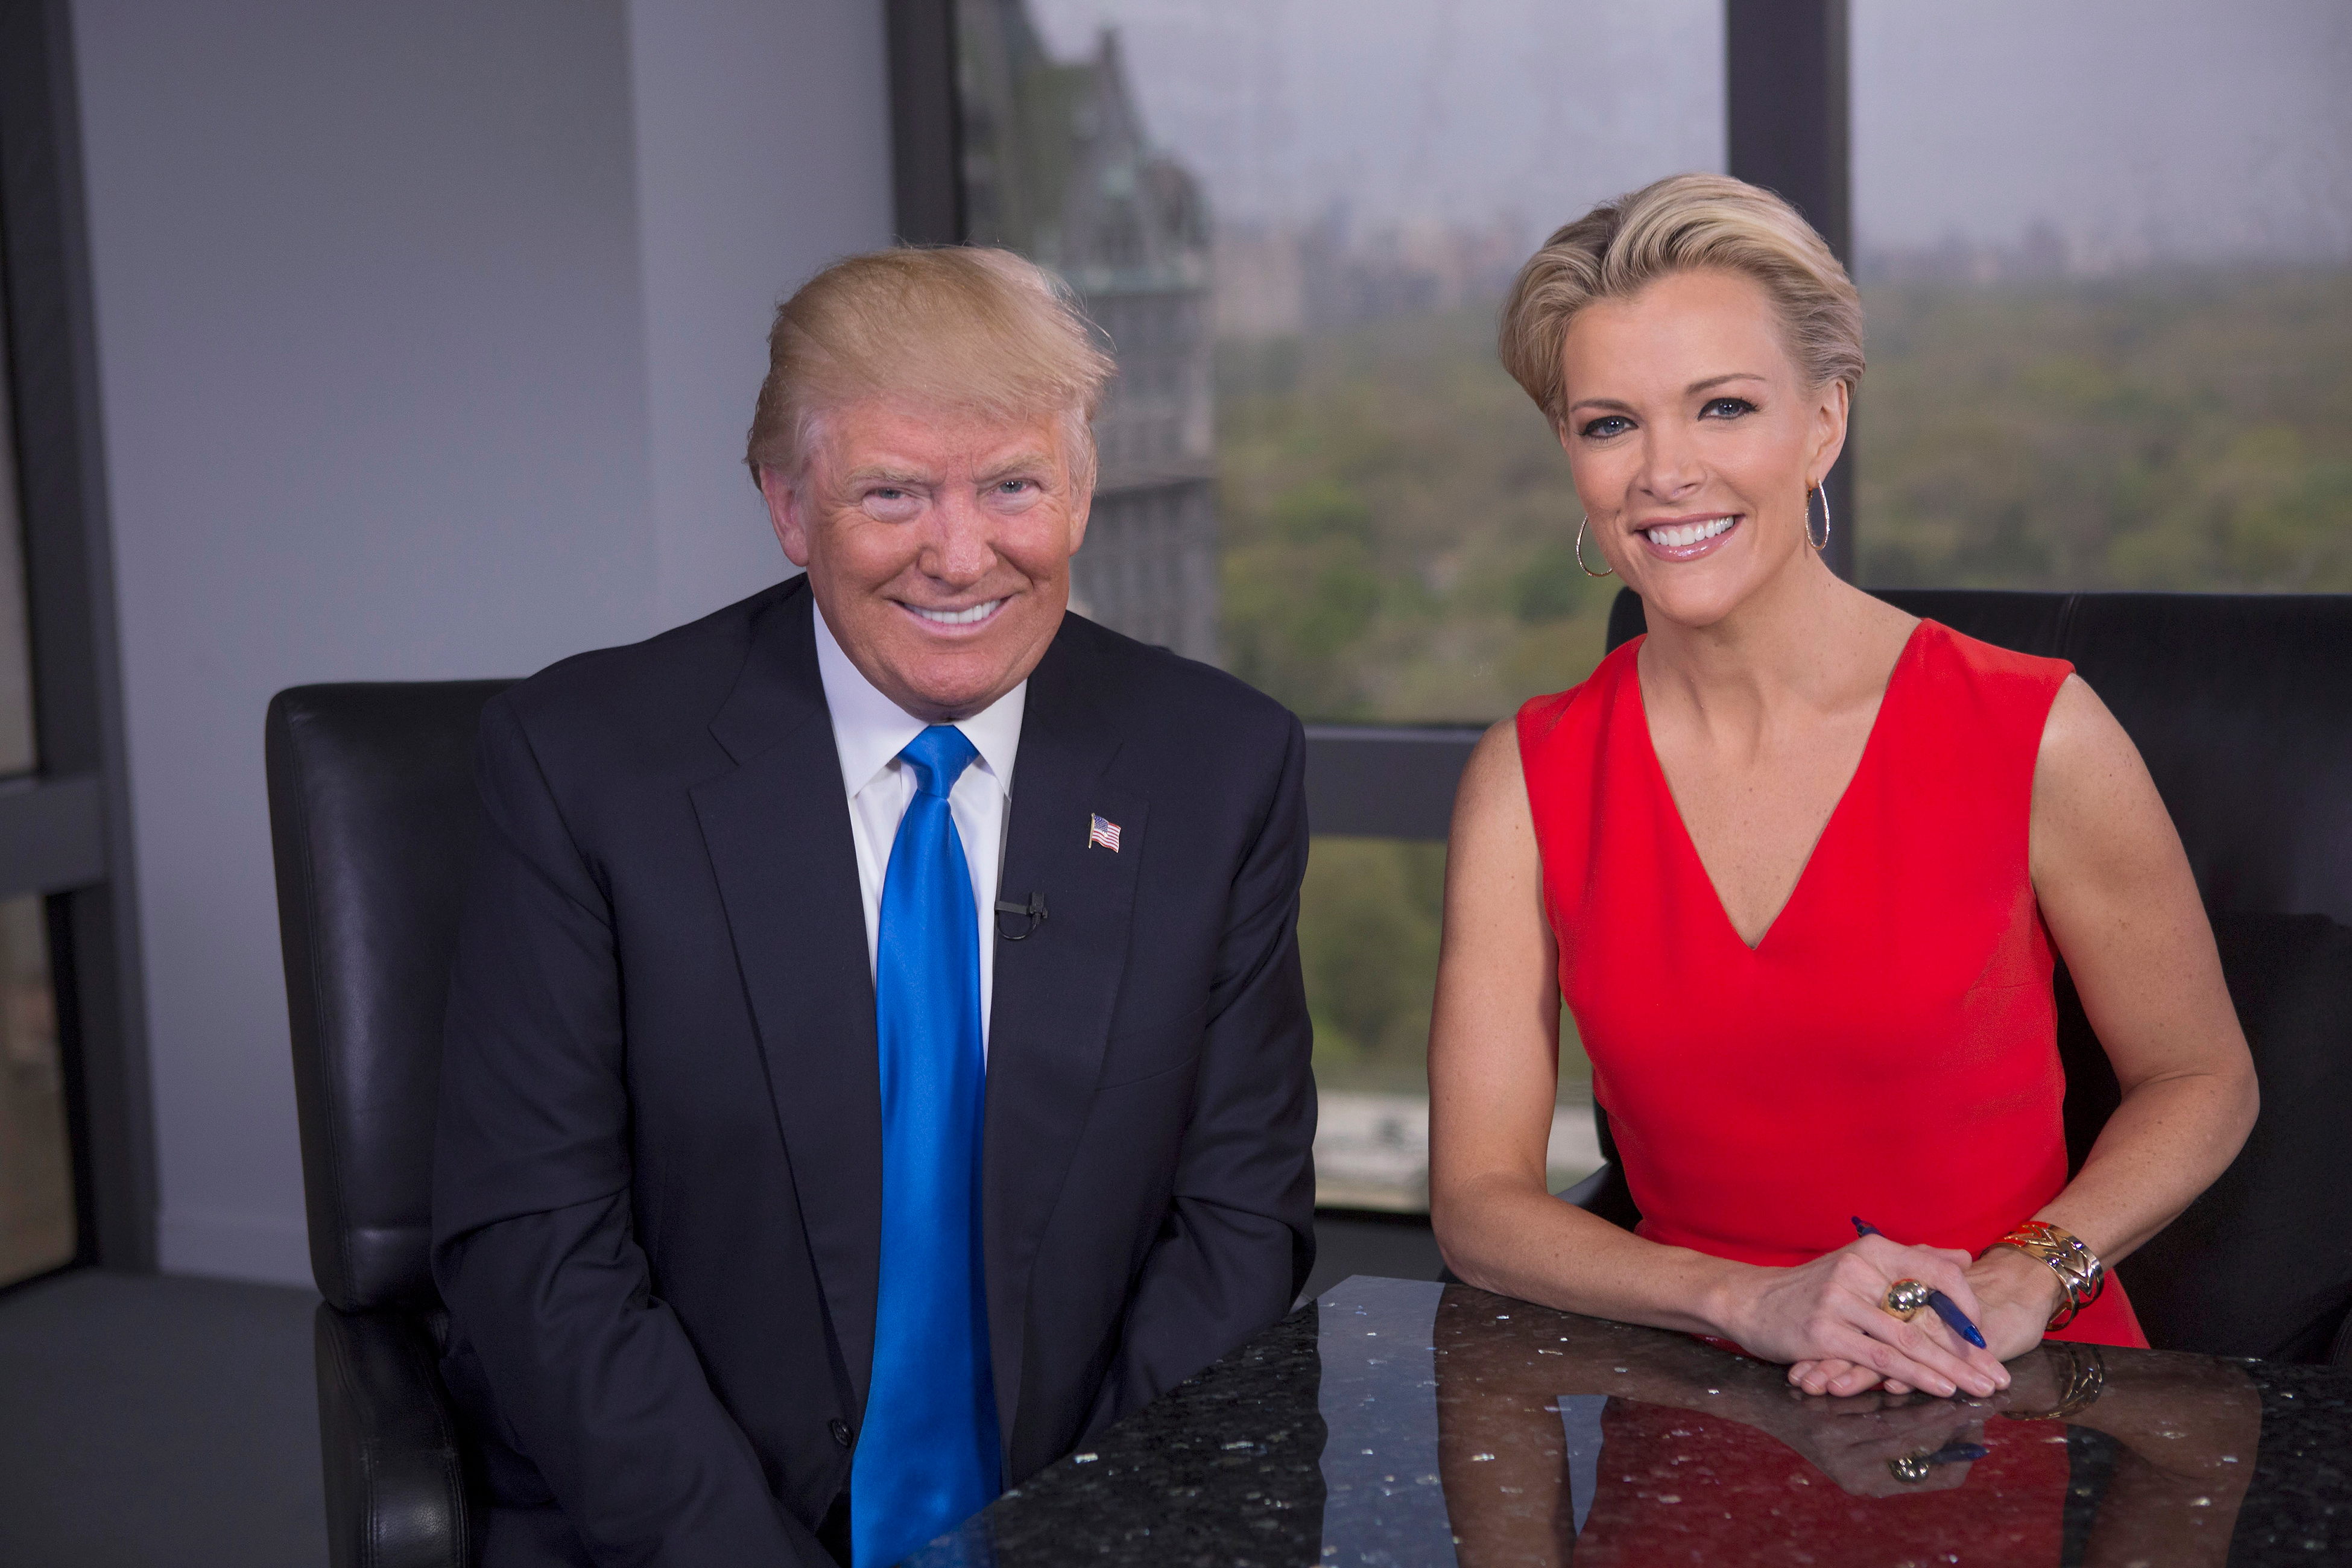 MEGYN KELLY presents: Megyn Kelly (R) and Donald Trump (L) during the FOX special "MEGYN KELLY presents" airing Tuesday, May 17 (8:00-9:01 PM ET/PT) on FOX. (Photo by Eric Liebowitz/FOX via Getty Images) (FOX&mdash;FOX via Getty Images)